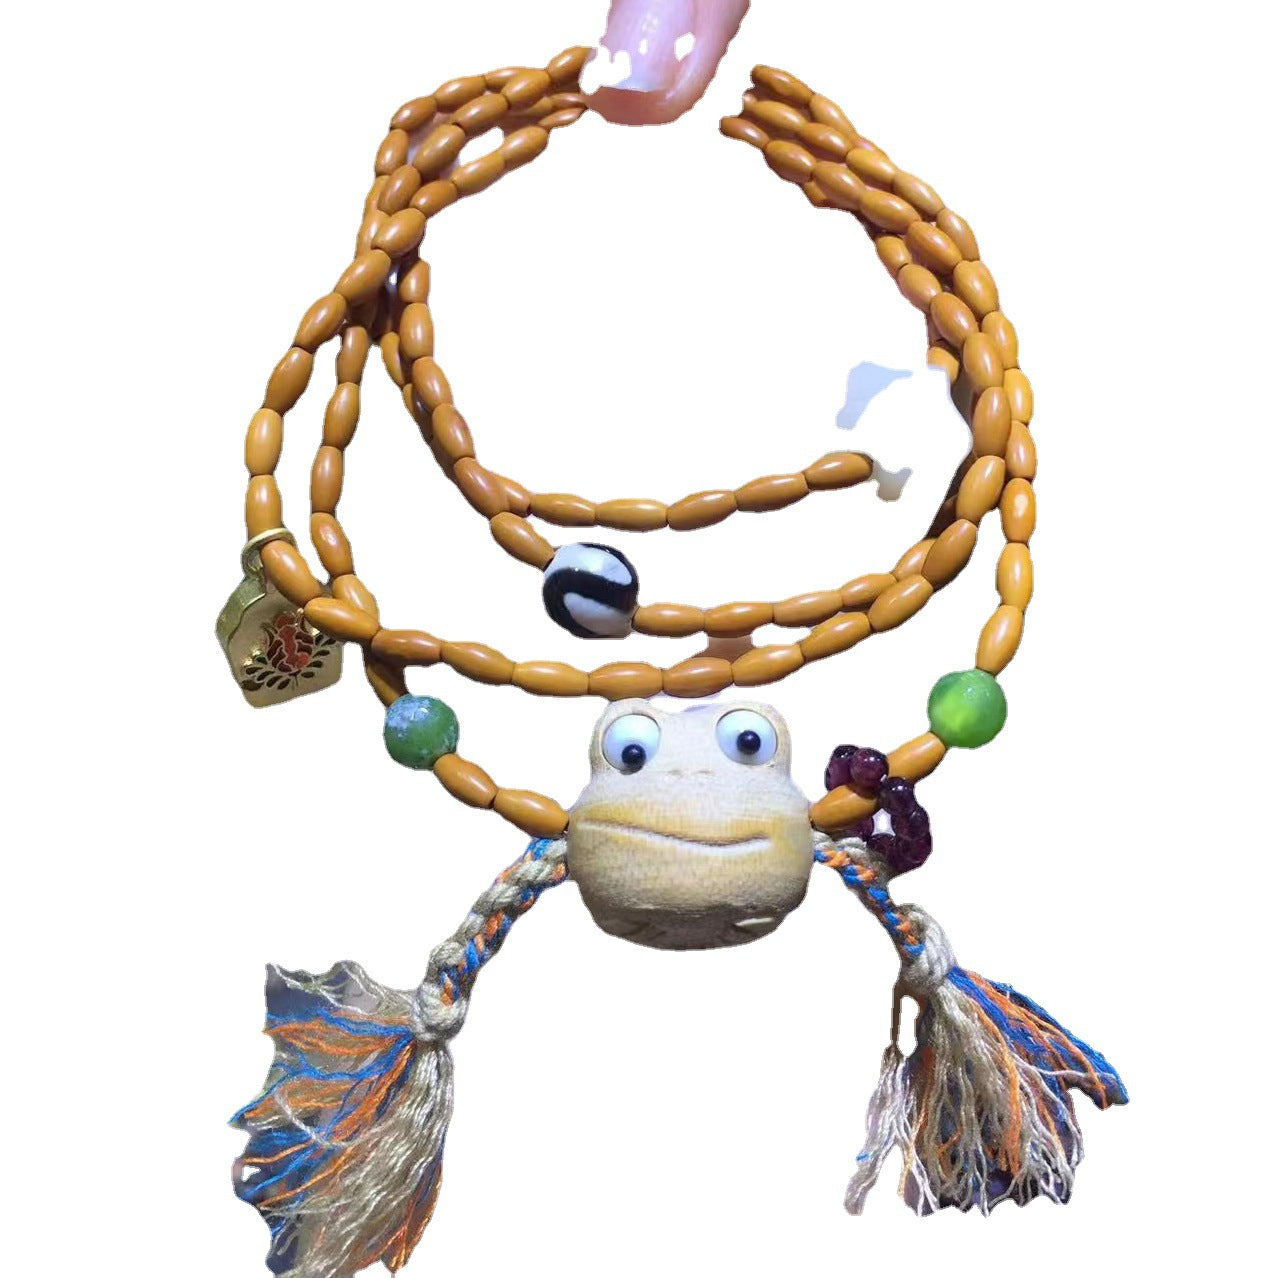 A person is holding an Olive Nut Multi-Circle Bohemian Bracelet with a frog on it from Maramalive™.